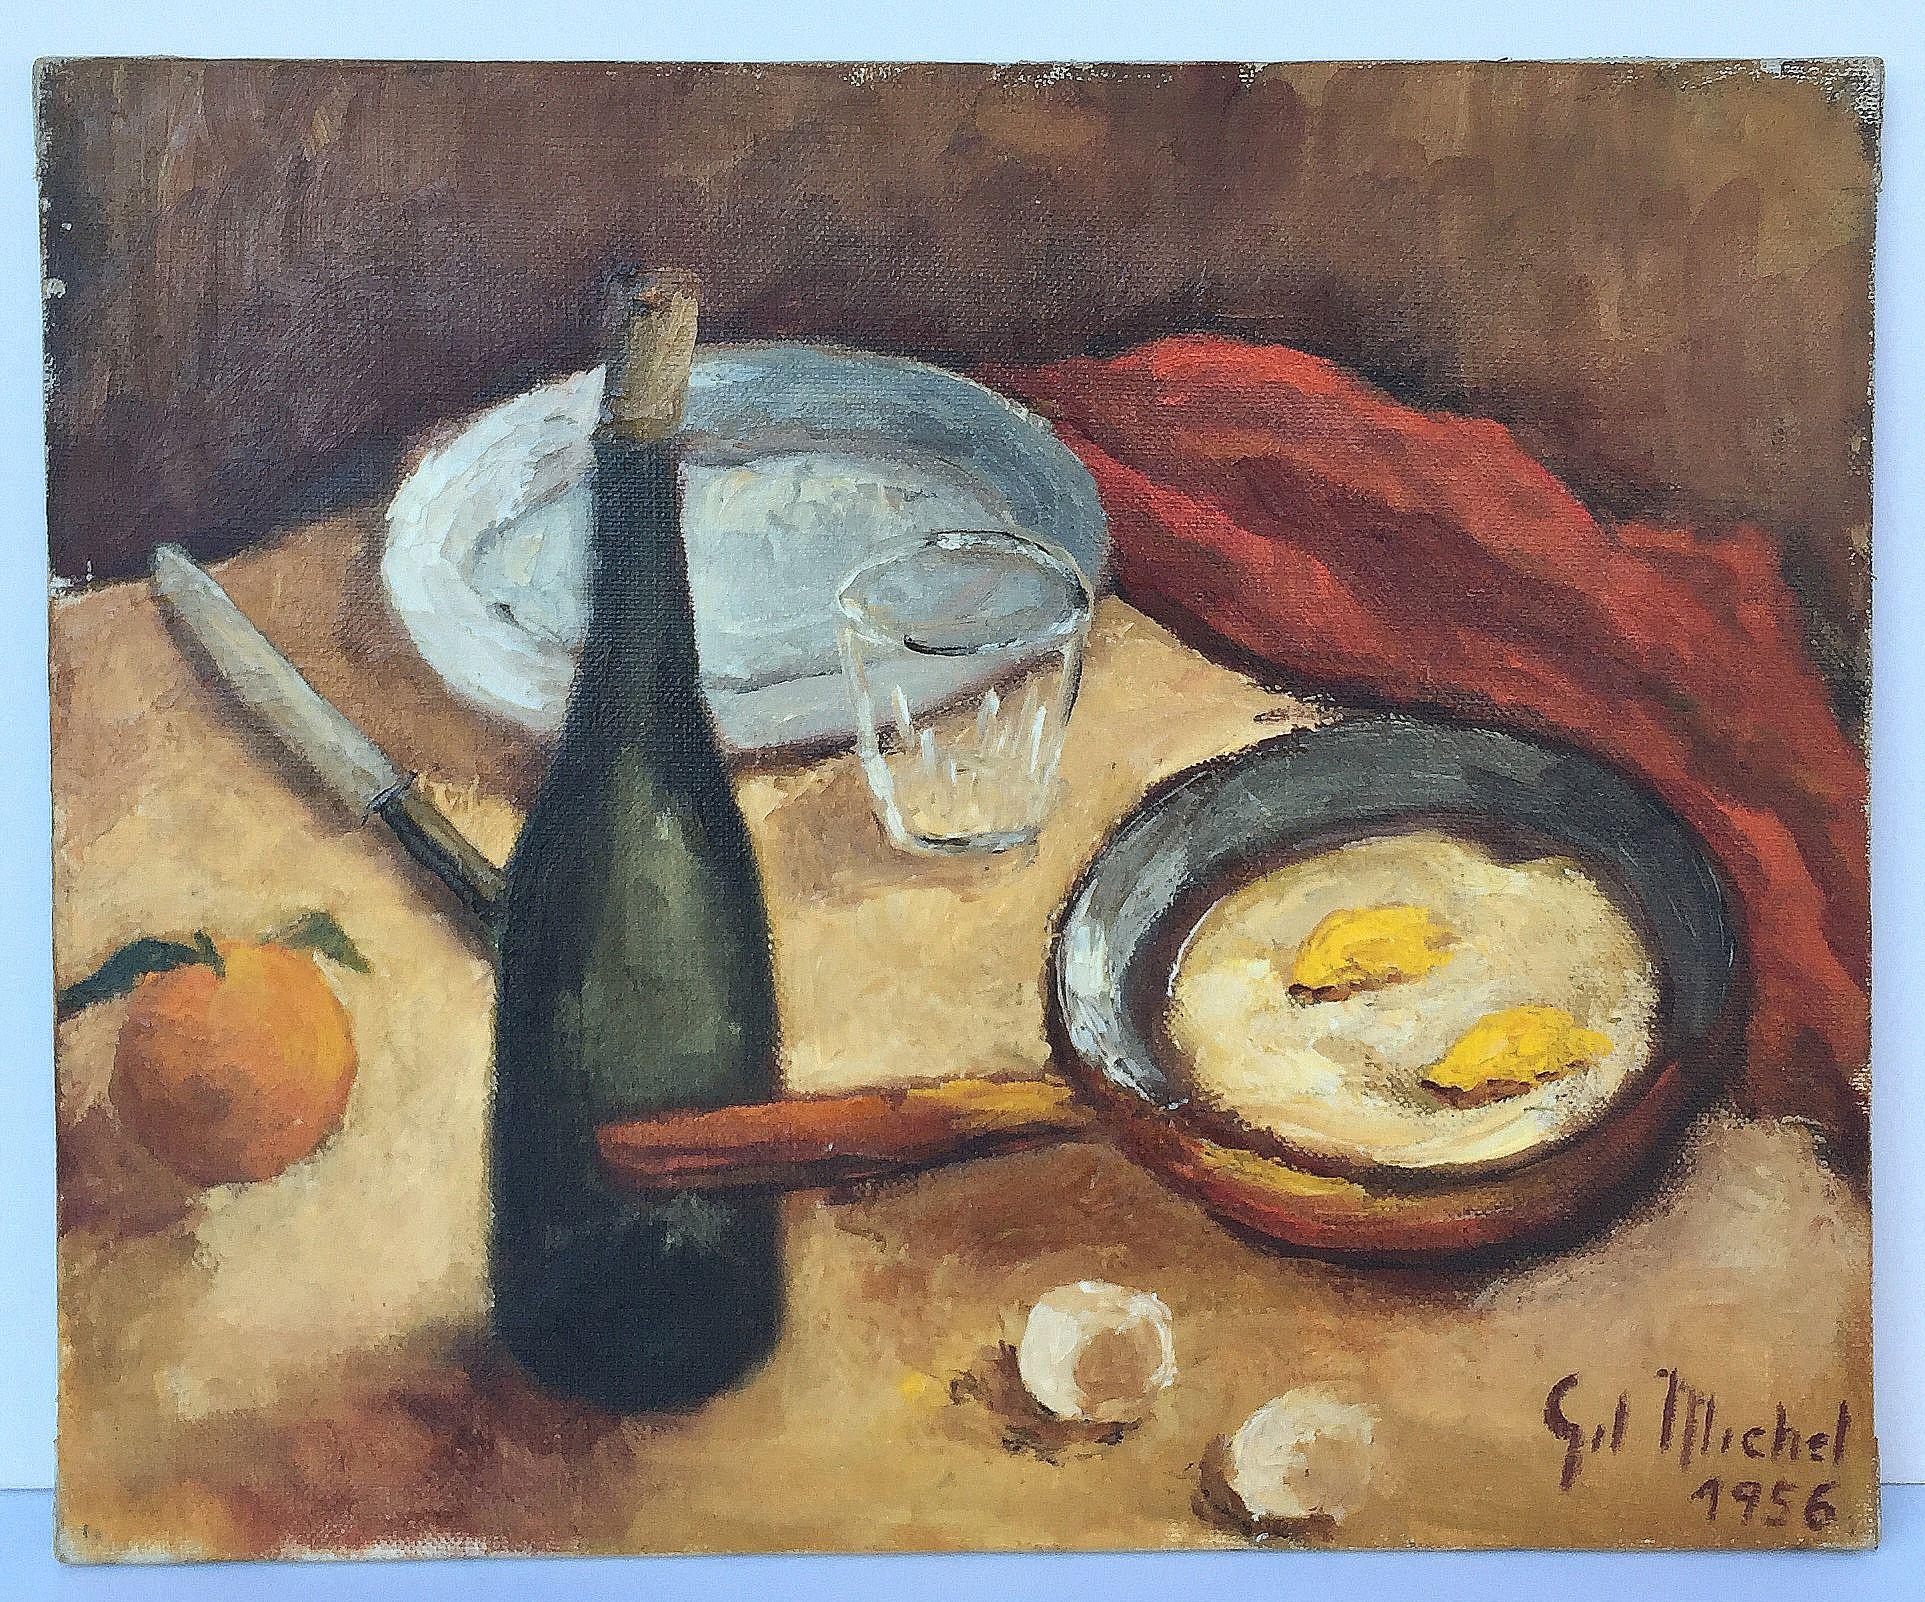 A fine vintage French oil painting on unframed canvas of a table setting, featuring a food scene of a pan with eggs, an orange, and a bottle of wine, entitled 'Le Casse-Croûte' - meaning a light meal or snack in French.

Signed at the bottom: Gil